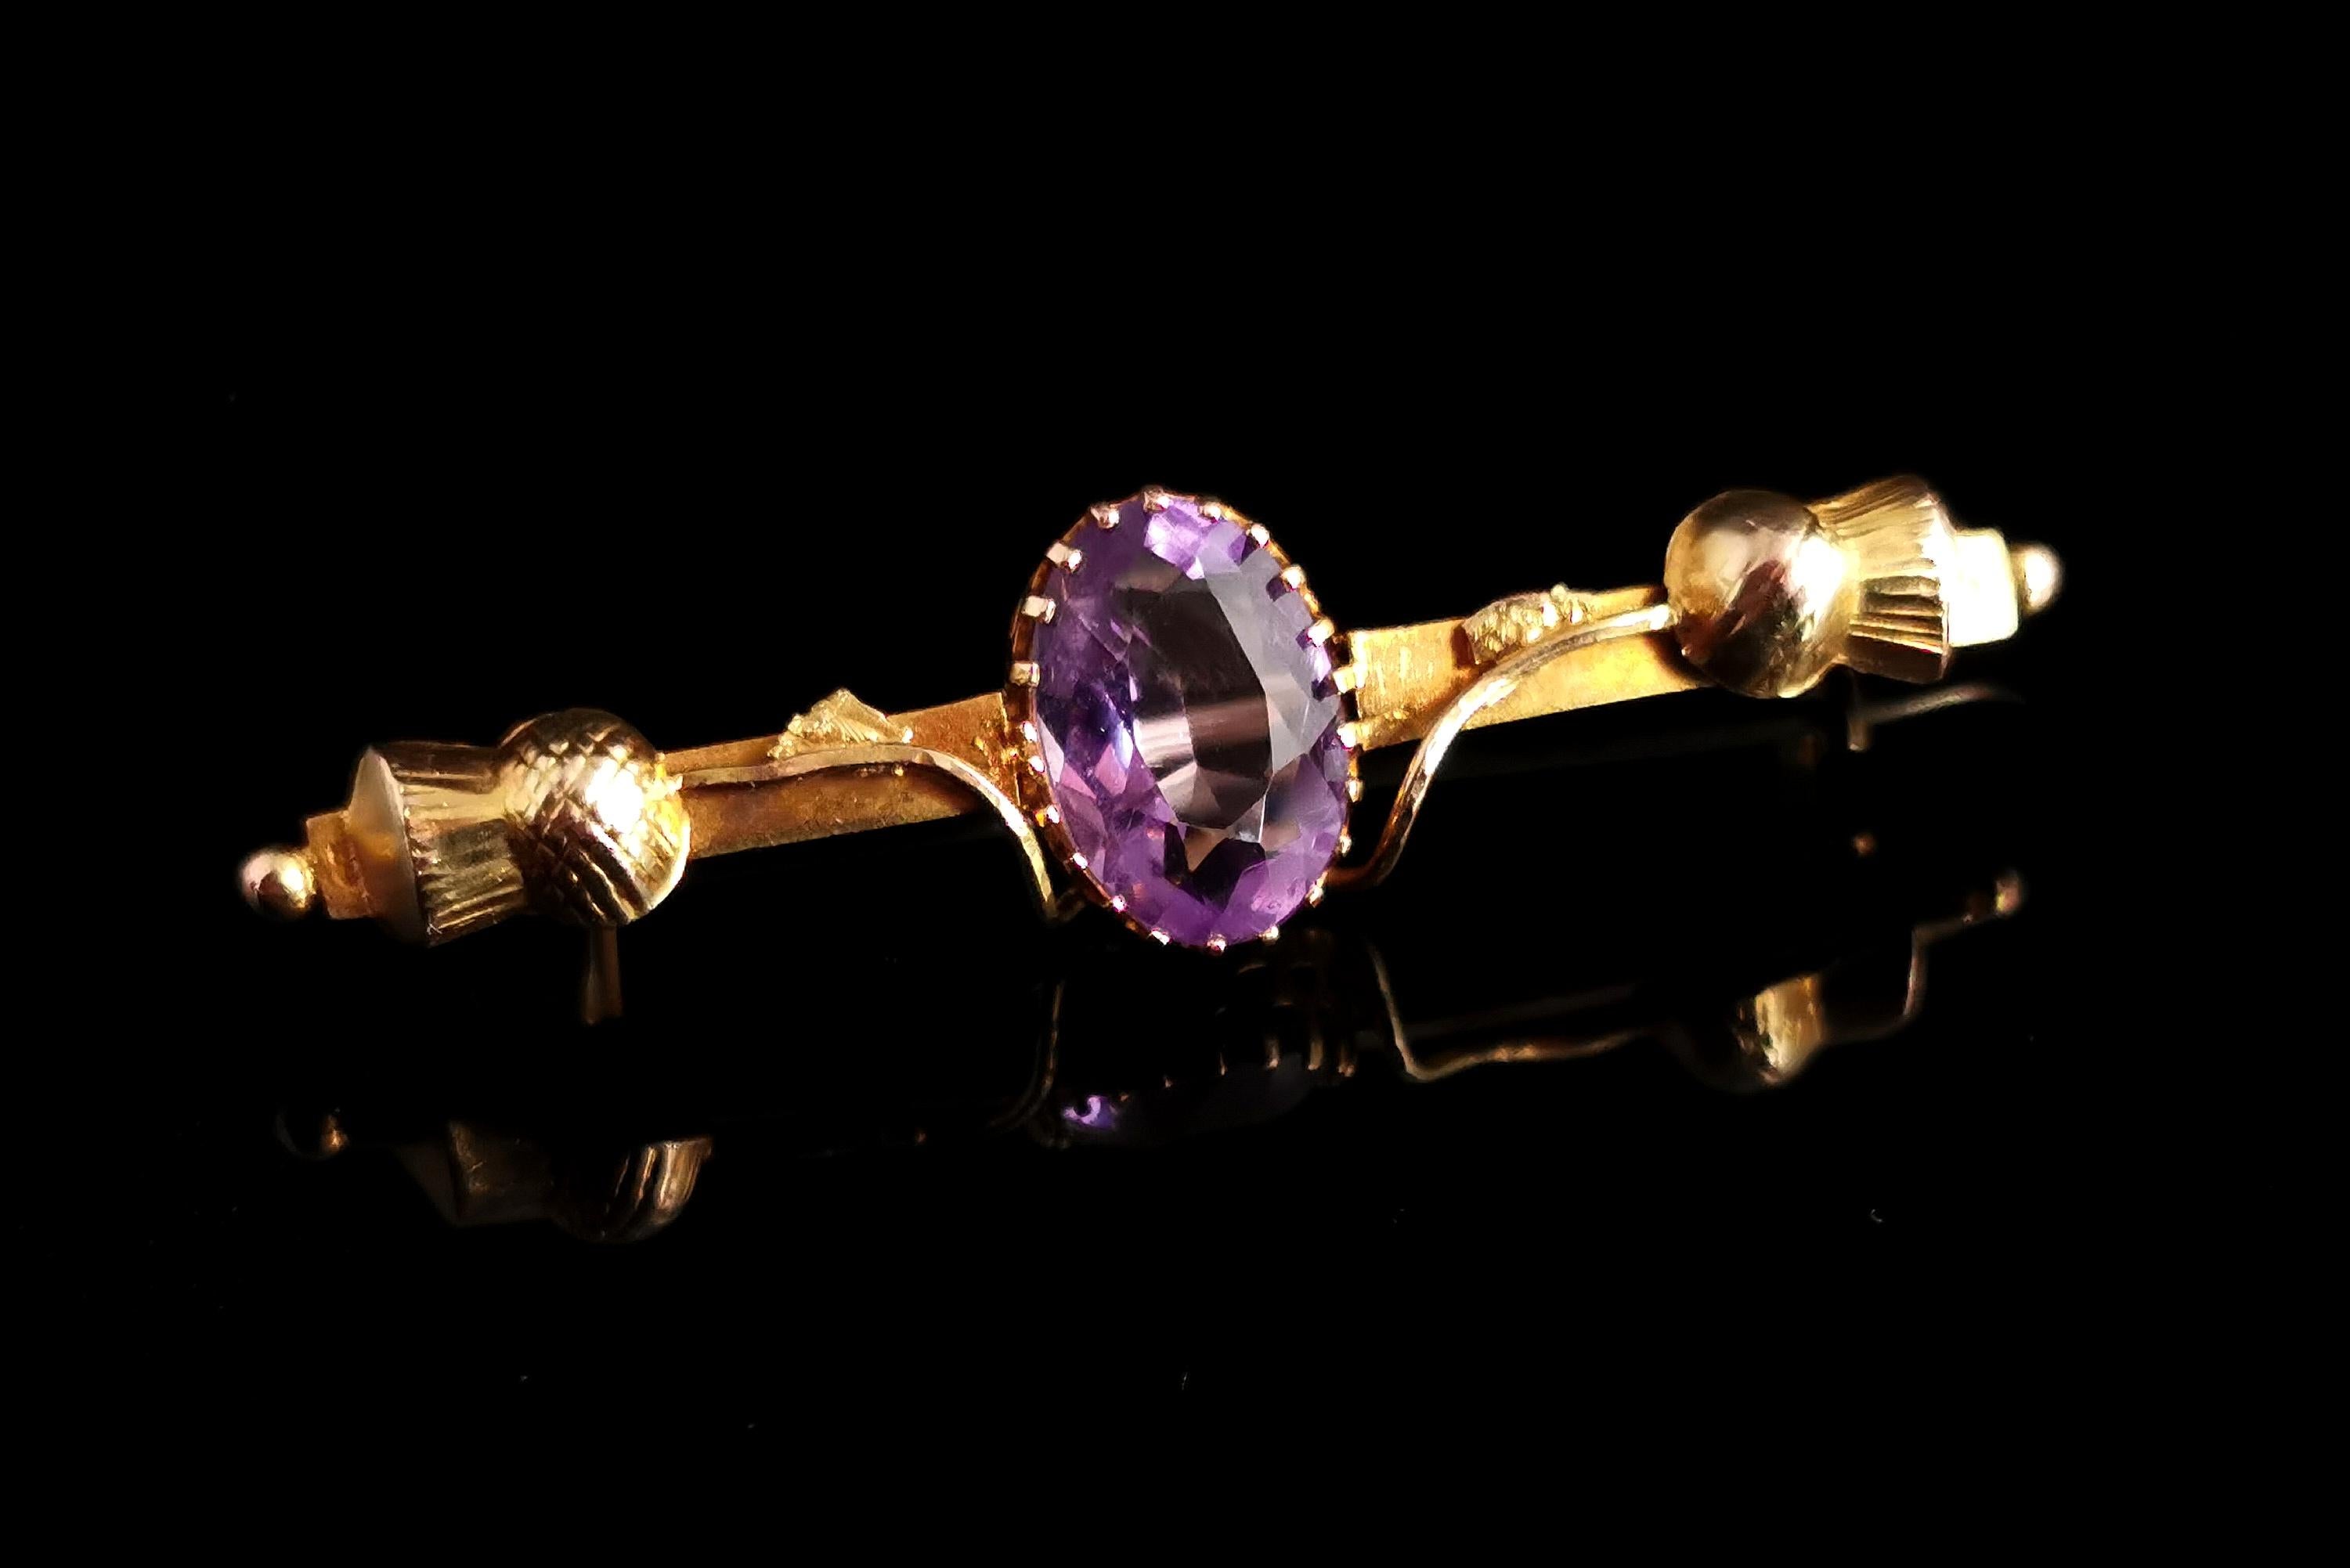 A gorgeous antique Scottish thistle brooch.

The rich gold bar brooch has two scrolling terminals each designed as a thistle flower.

The centre showcases a beautiful oval Amethyst, claw set with an approx 1.40 ct weight, a mid purple hue contrasts